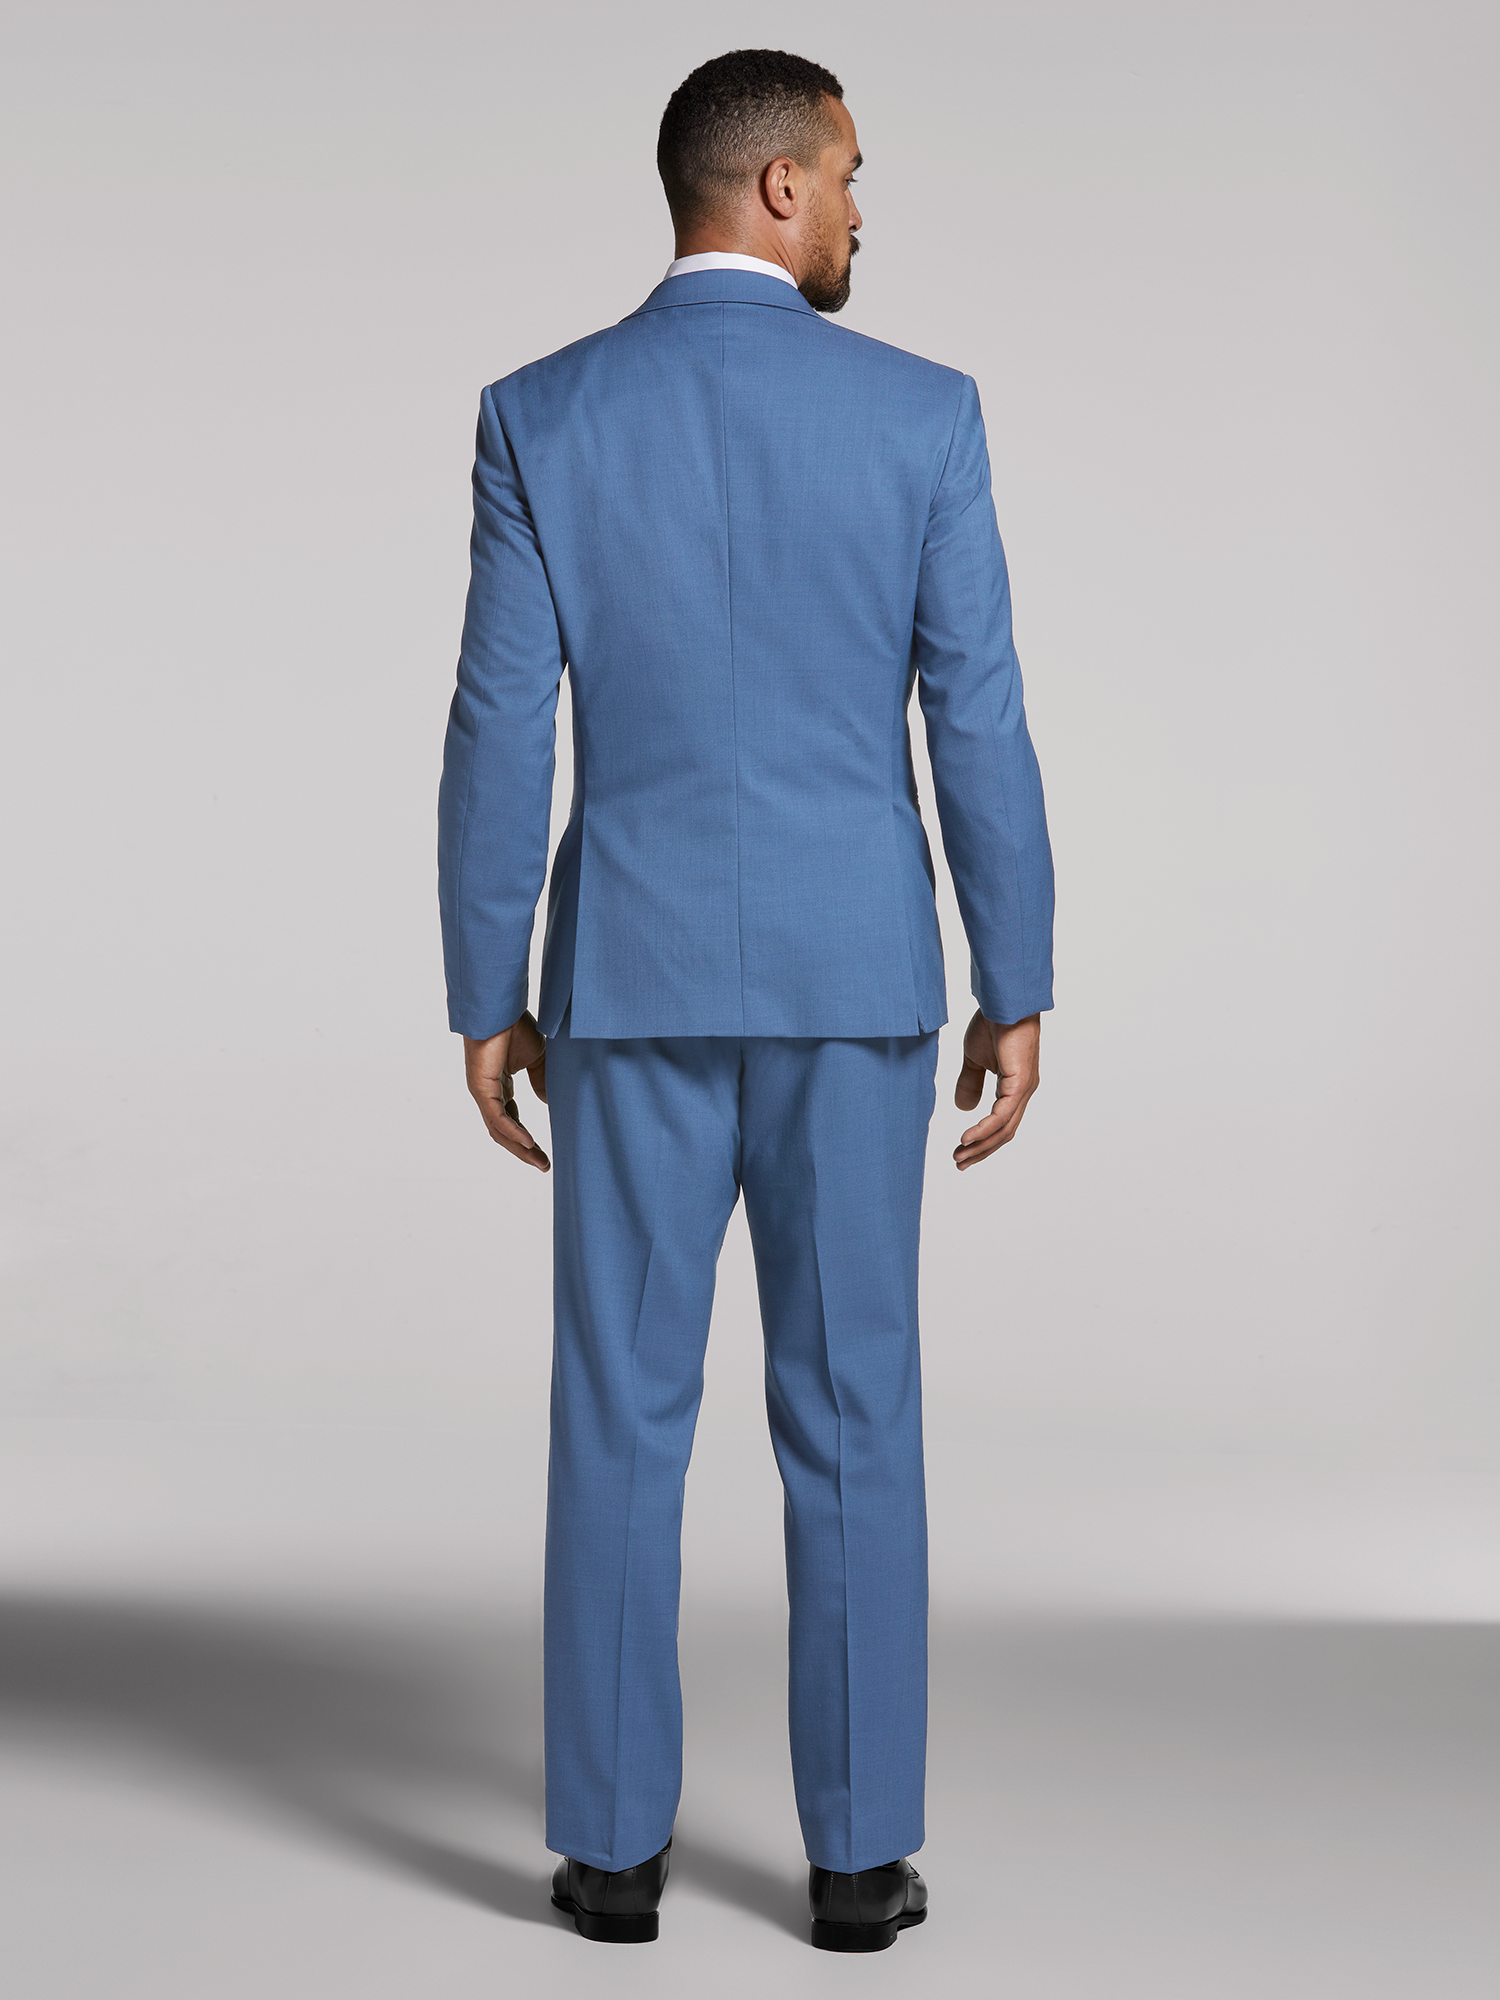 Timeless Chic: Blue Two-Piece Suit for Women, a Classic Wardrobe Staple”, by Payalvats